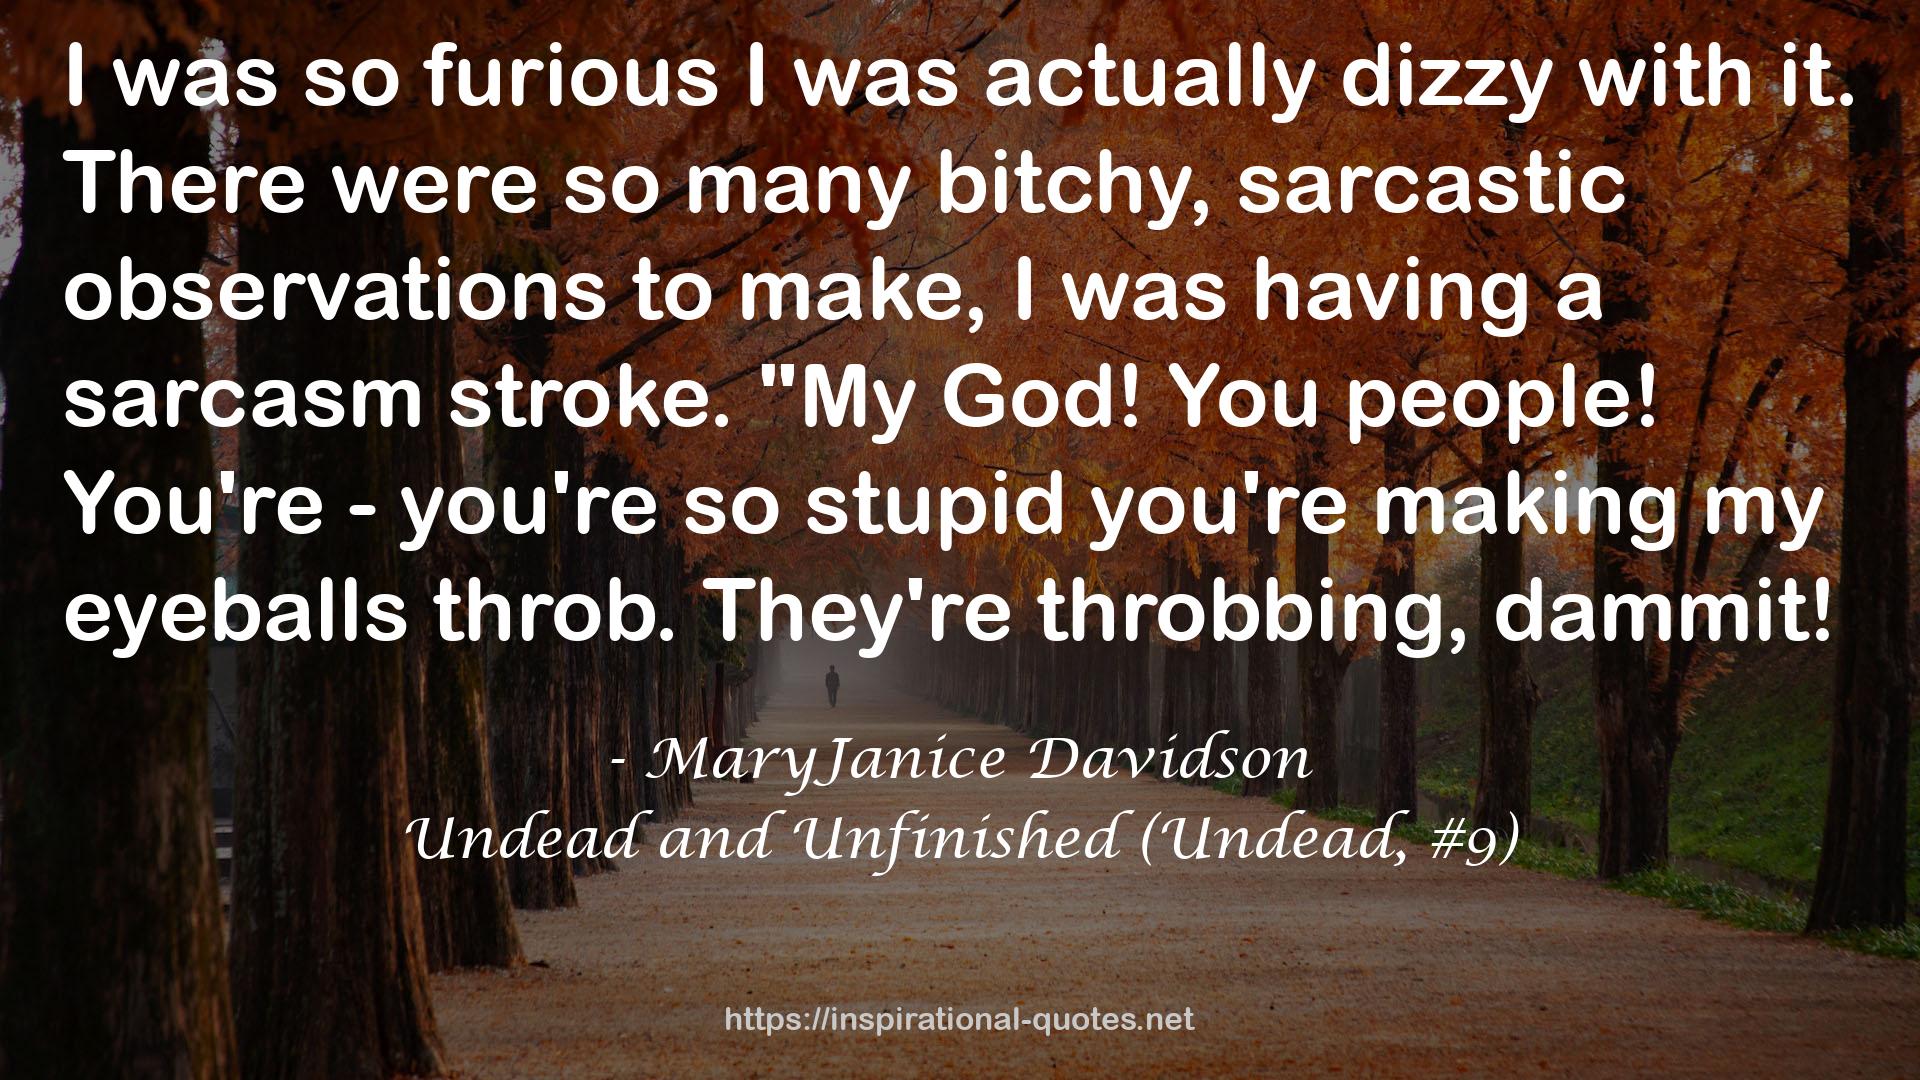 Undead and Unfinished (Undead, #9) QUOTES